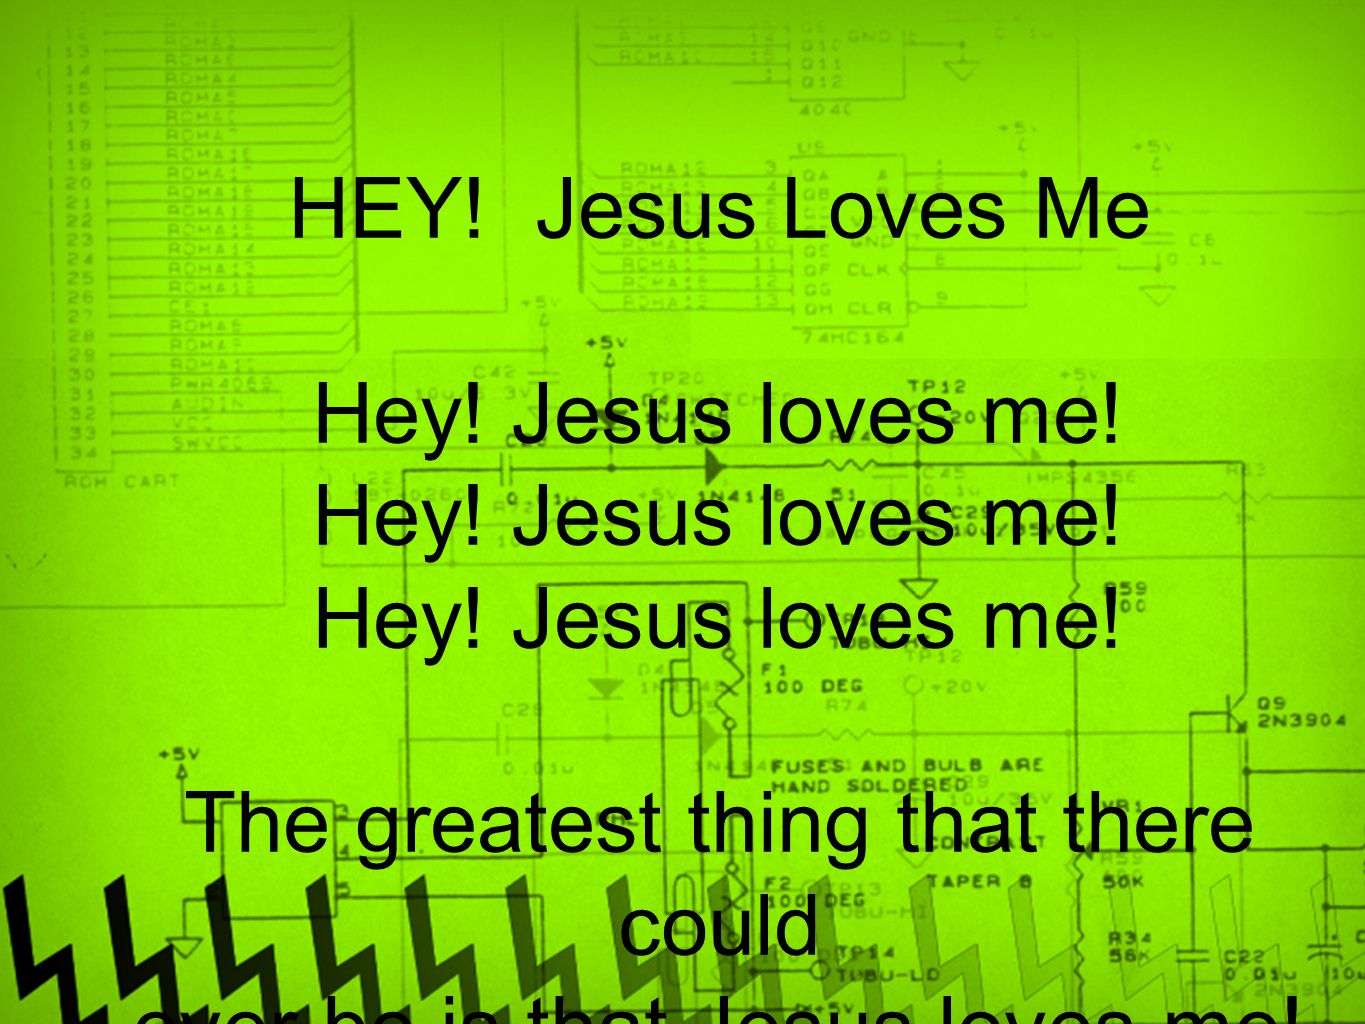 The greatest thing that there could ever be is that Jesus loves me!